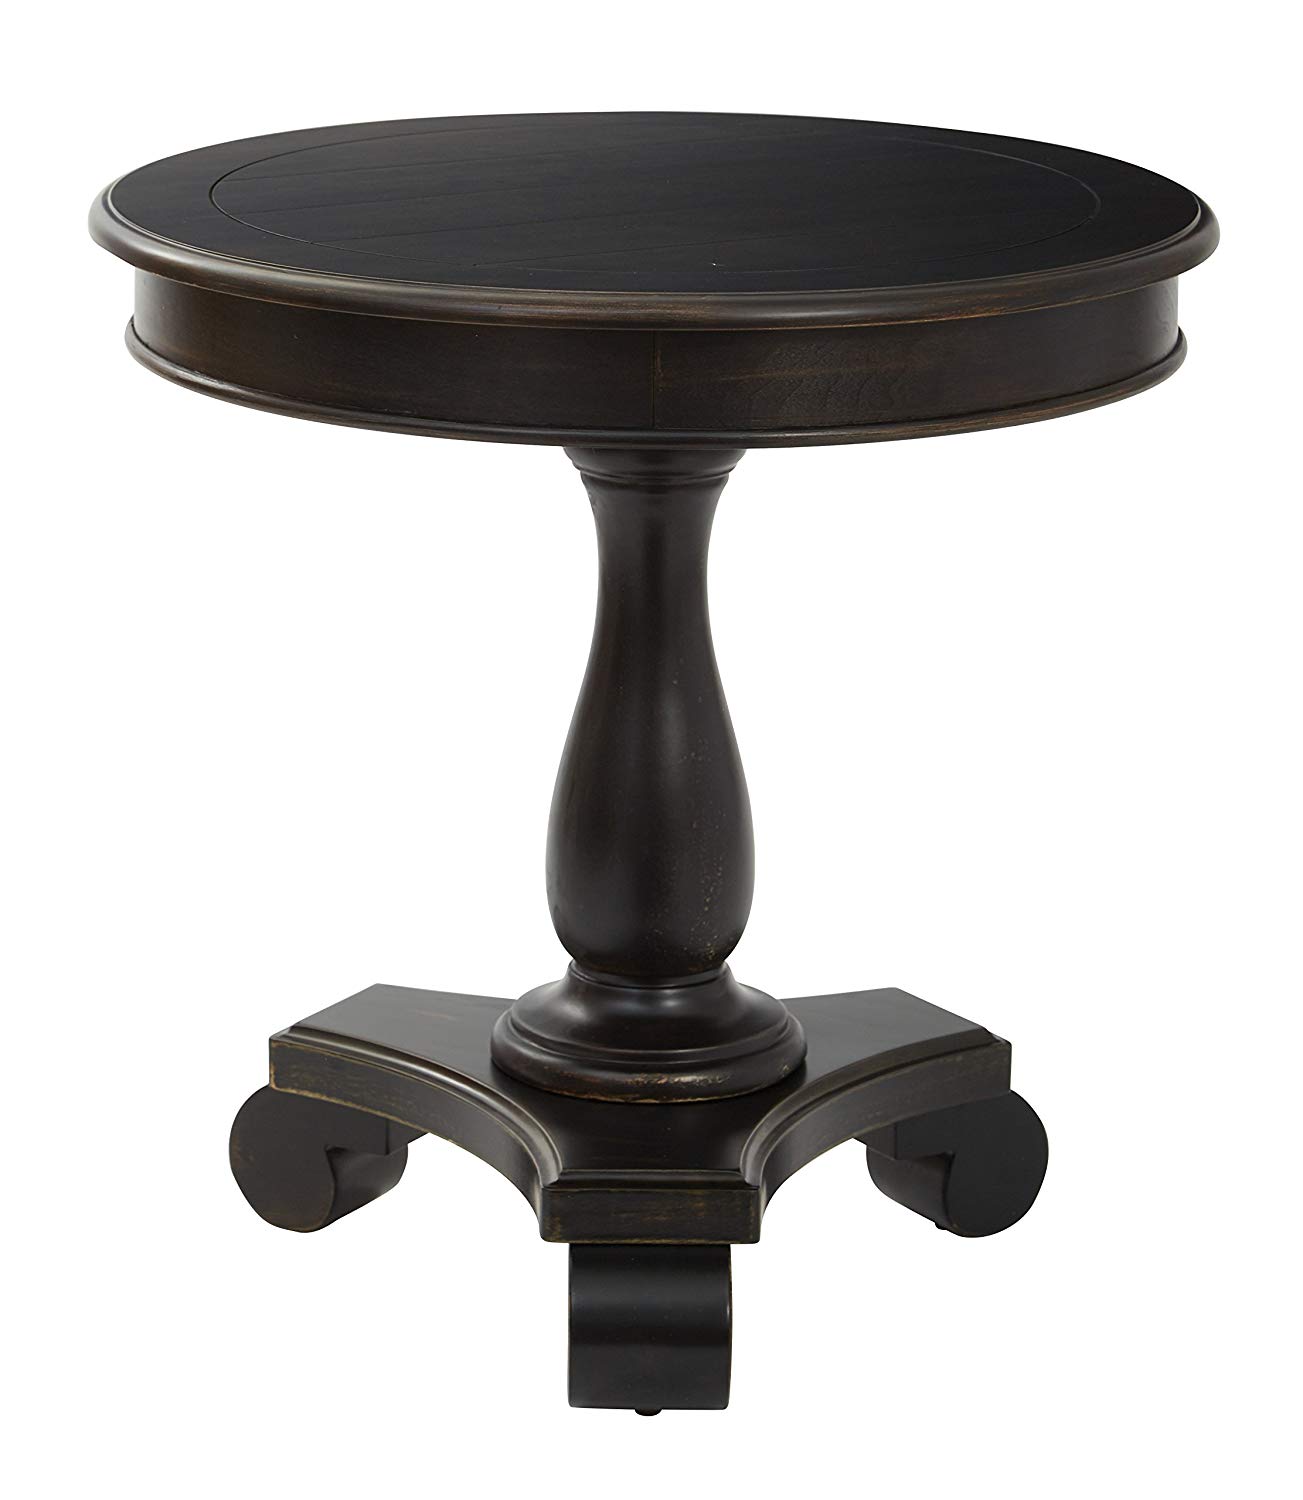 inspired bassett avlat osp avalon round accent table white antique black kitchen dining sportcraft ping pong corner furniture gold bedroom accessories marble side homesense tables